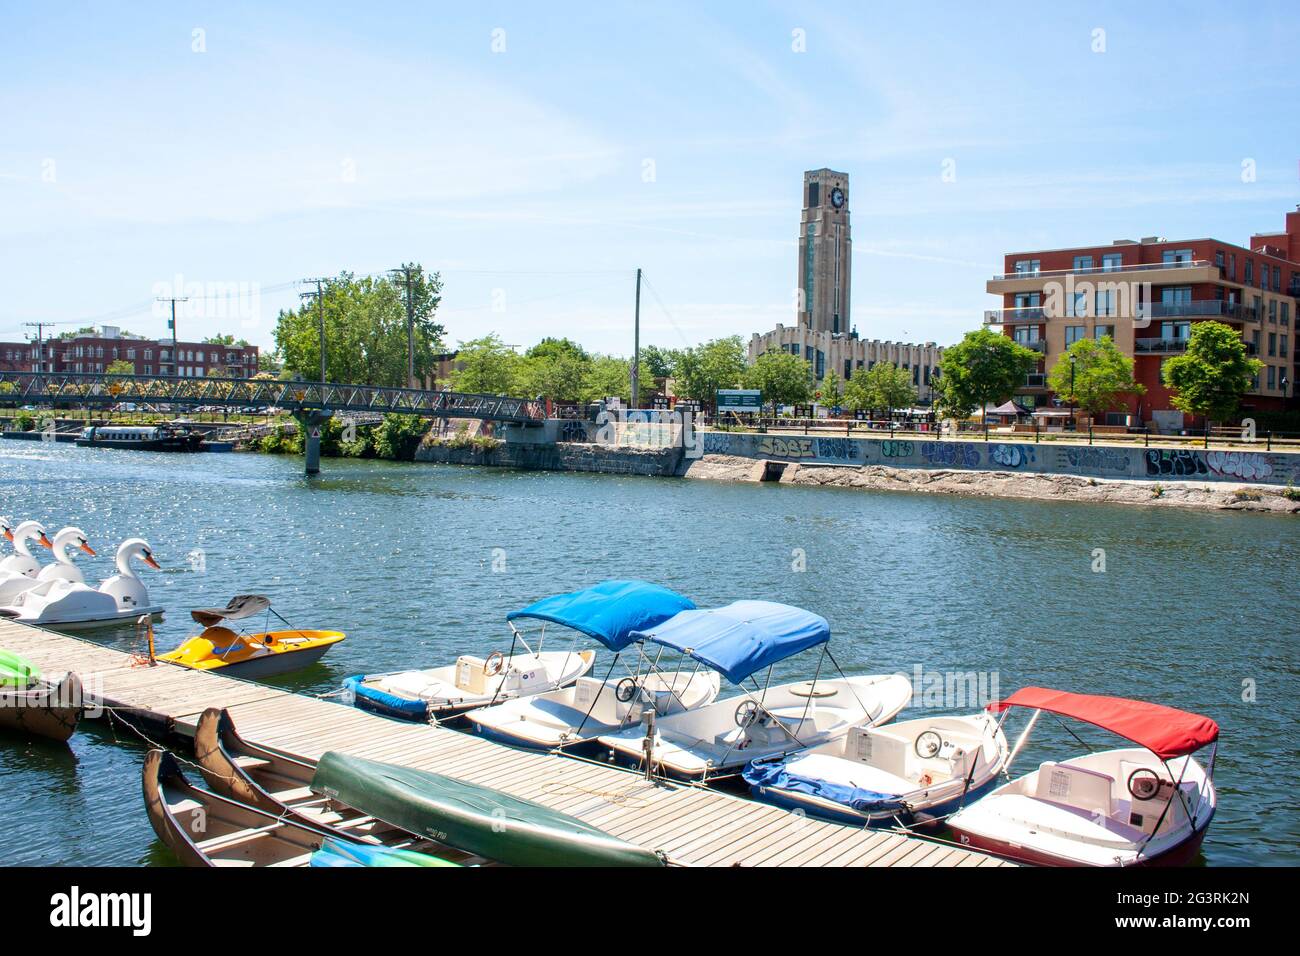 Montreal's Atwater Market seen across a boat rental dock and the Lachine Canal Stock Photo